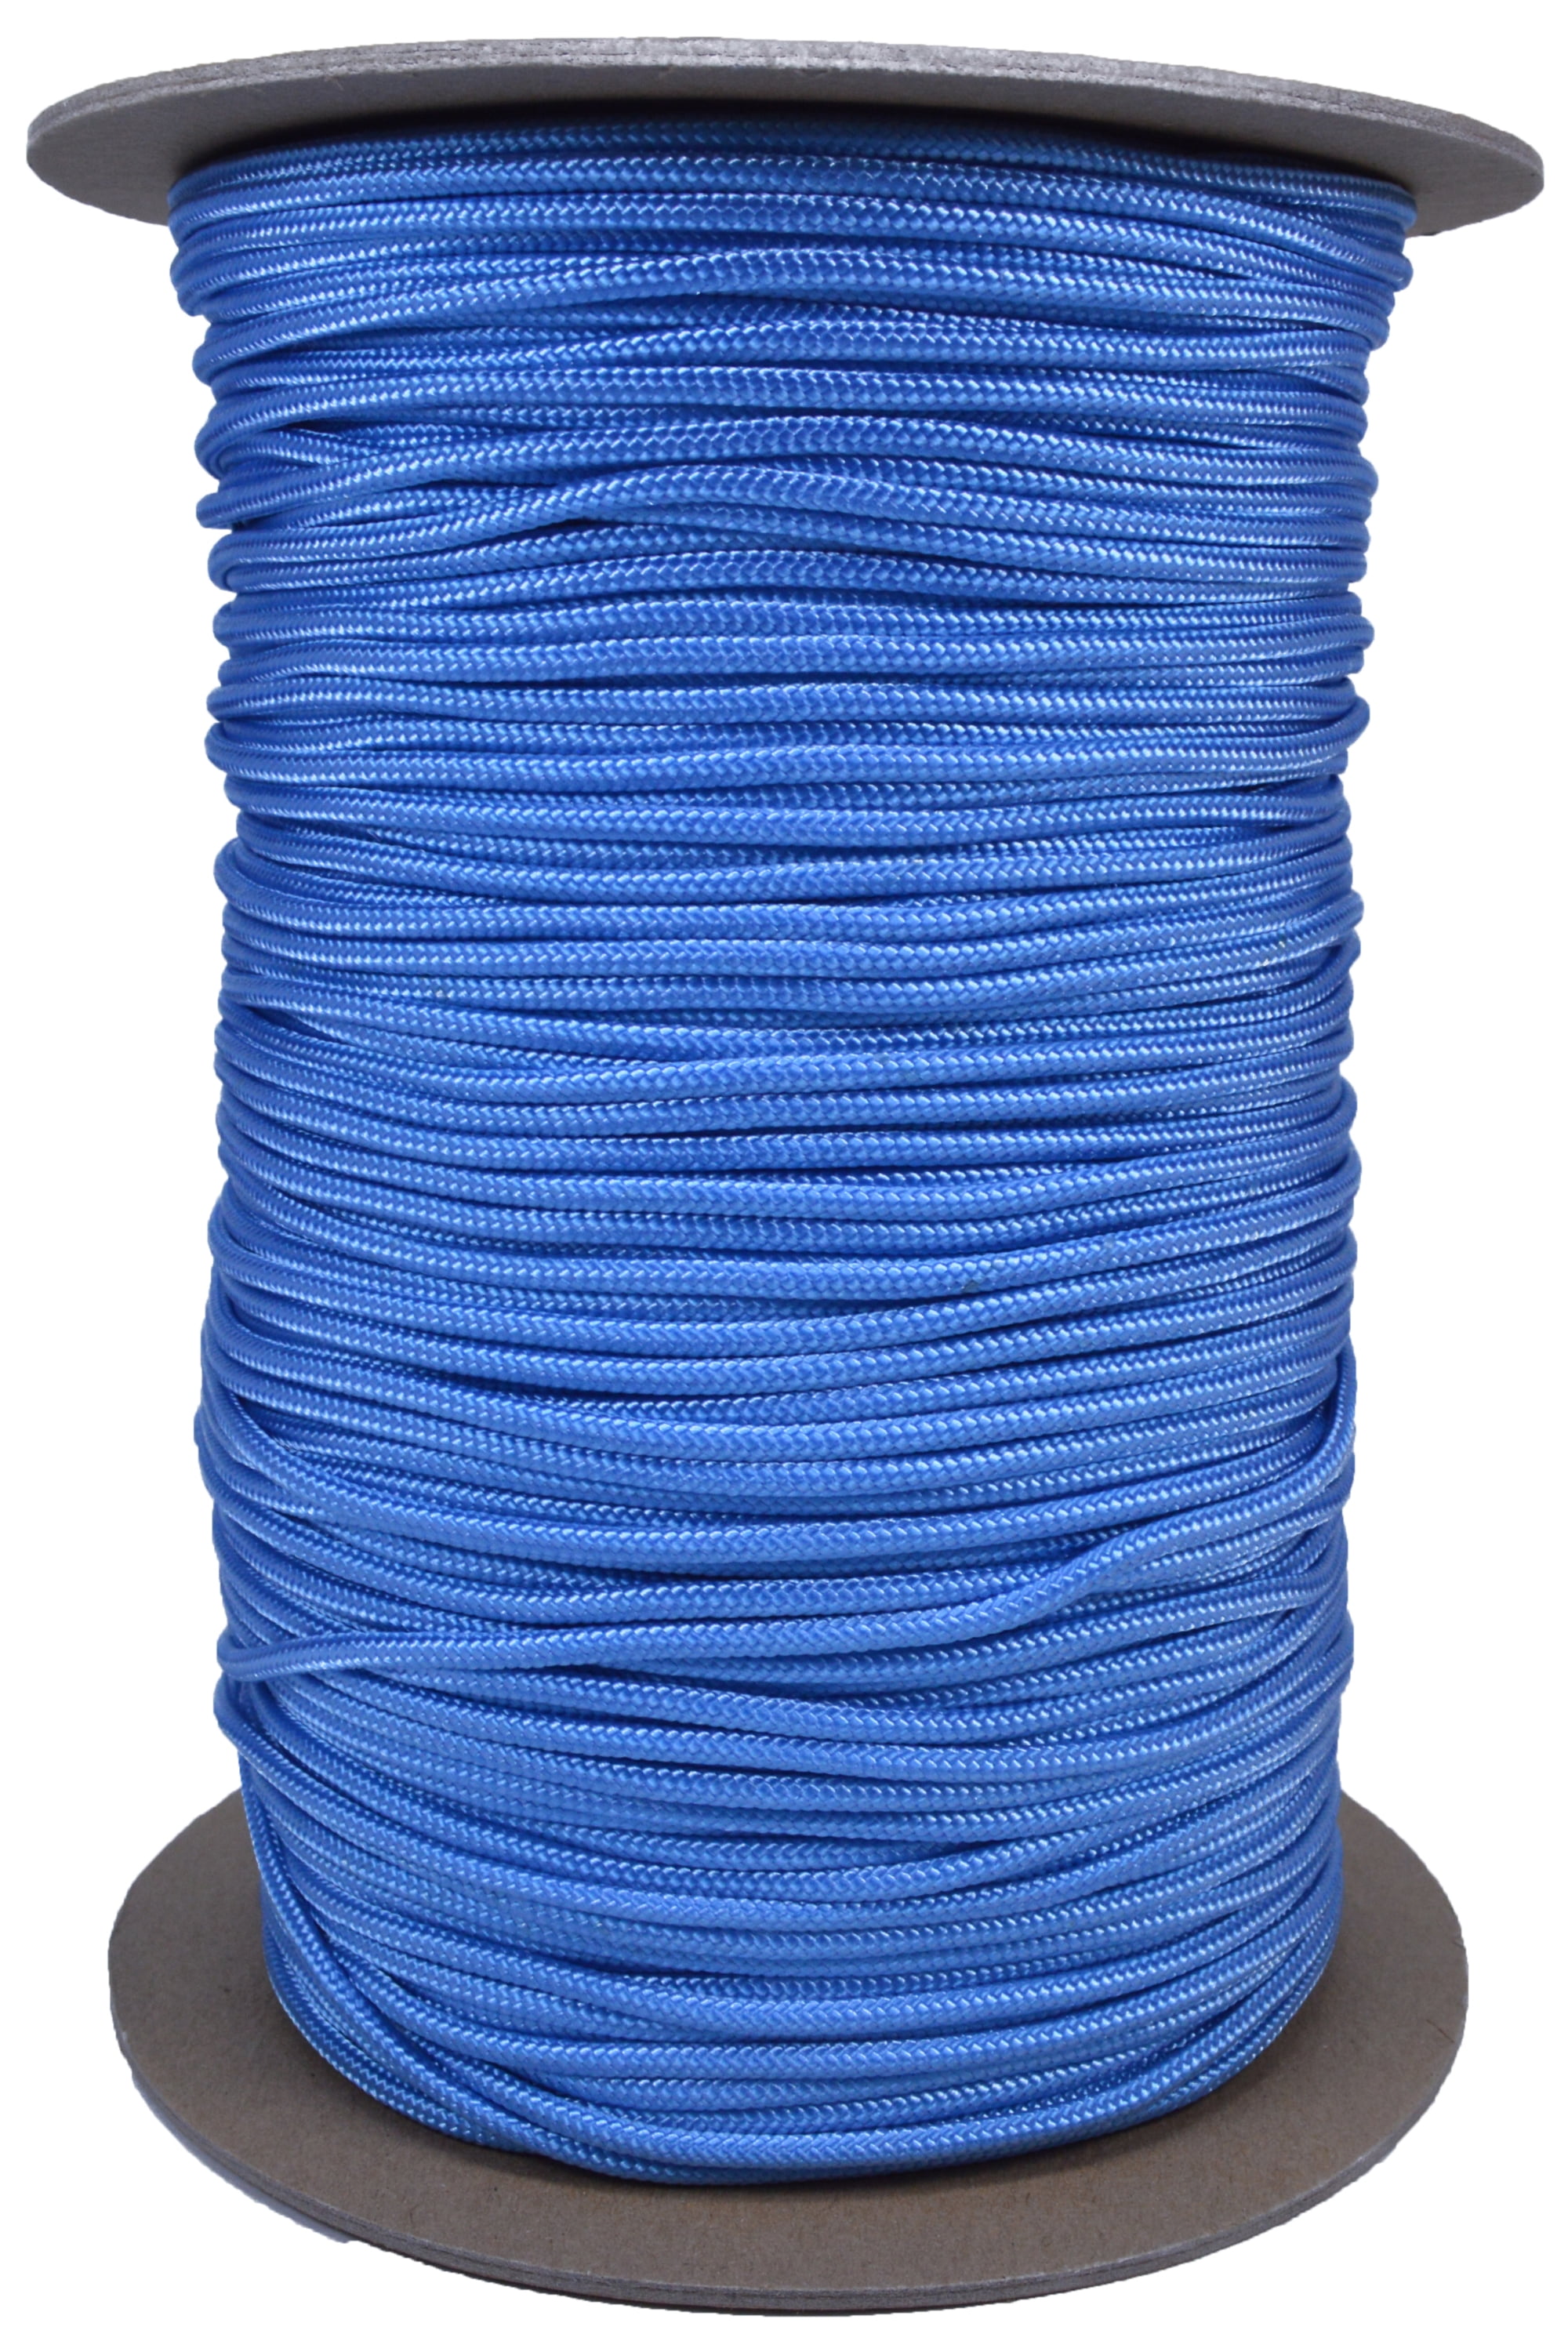 PARACORD PLANET 100' Hanks Parachute 550 Cord Type III 7 Strand Paracord  Top 40 Most Popular Colors (FS Navy Blue)